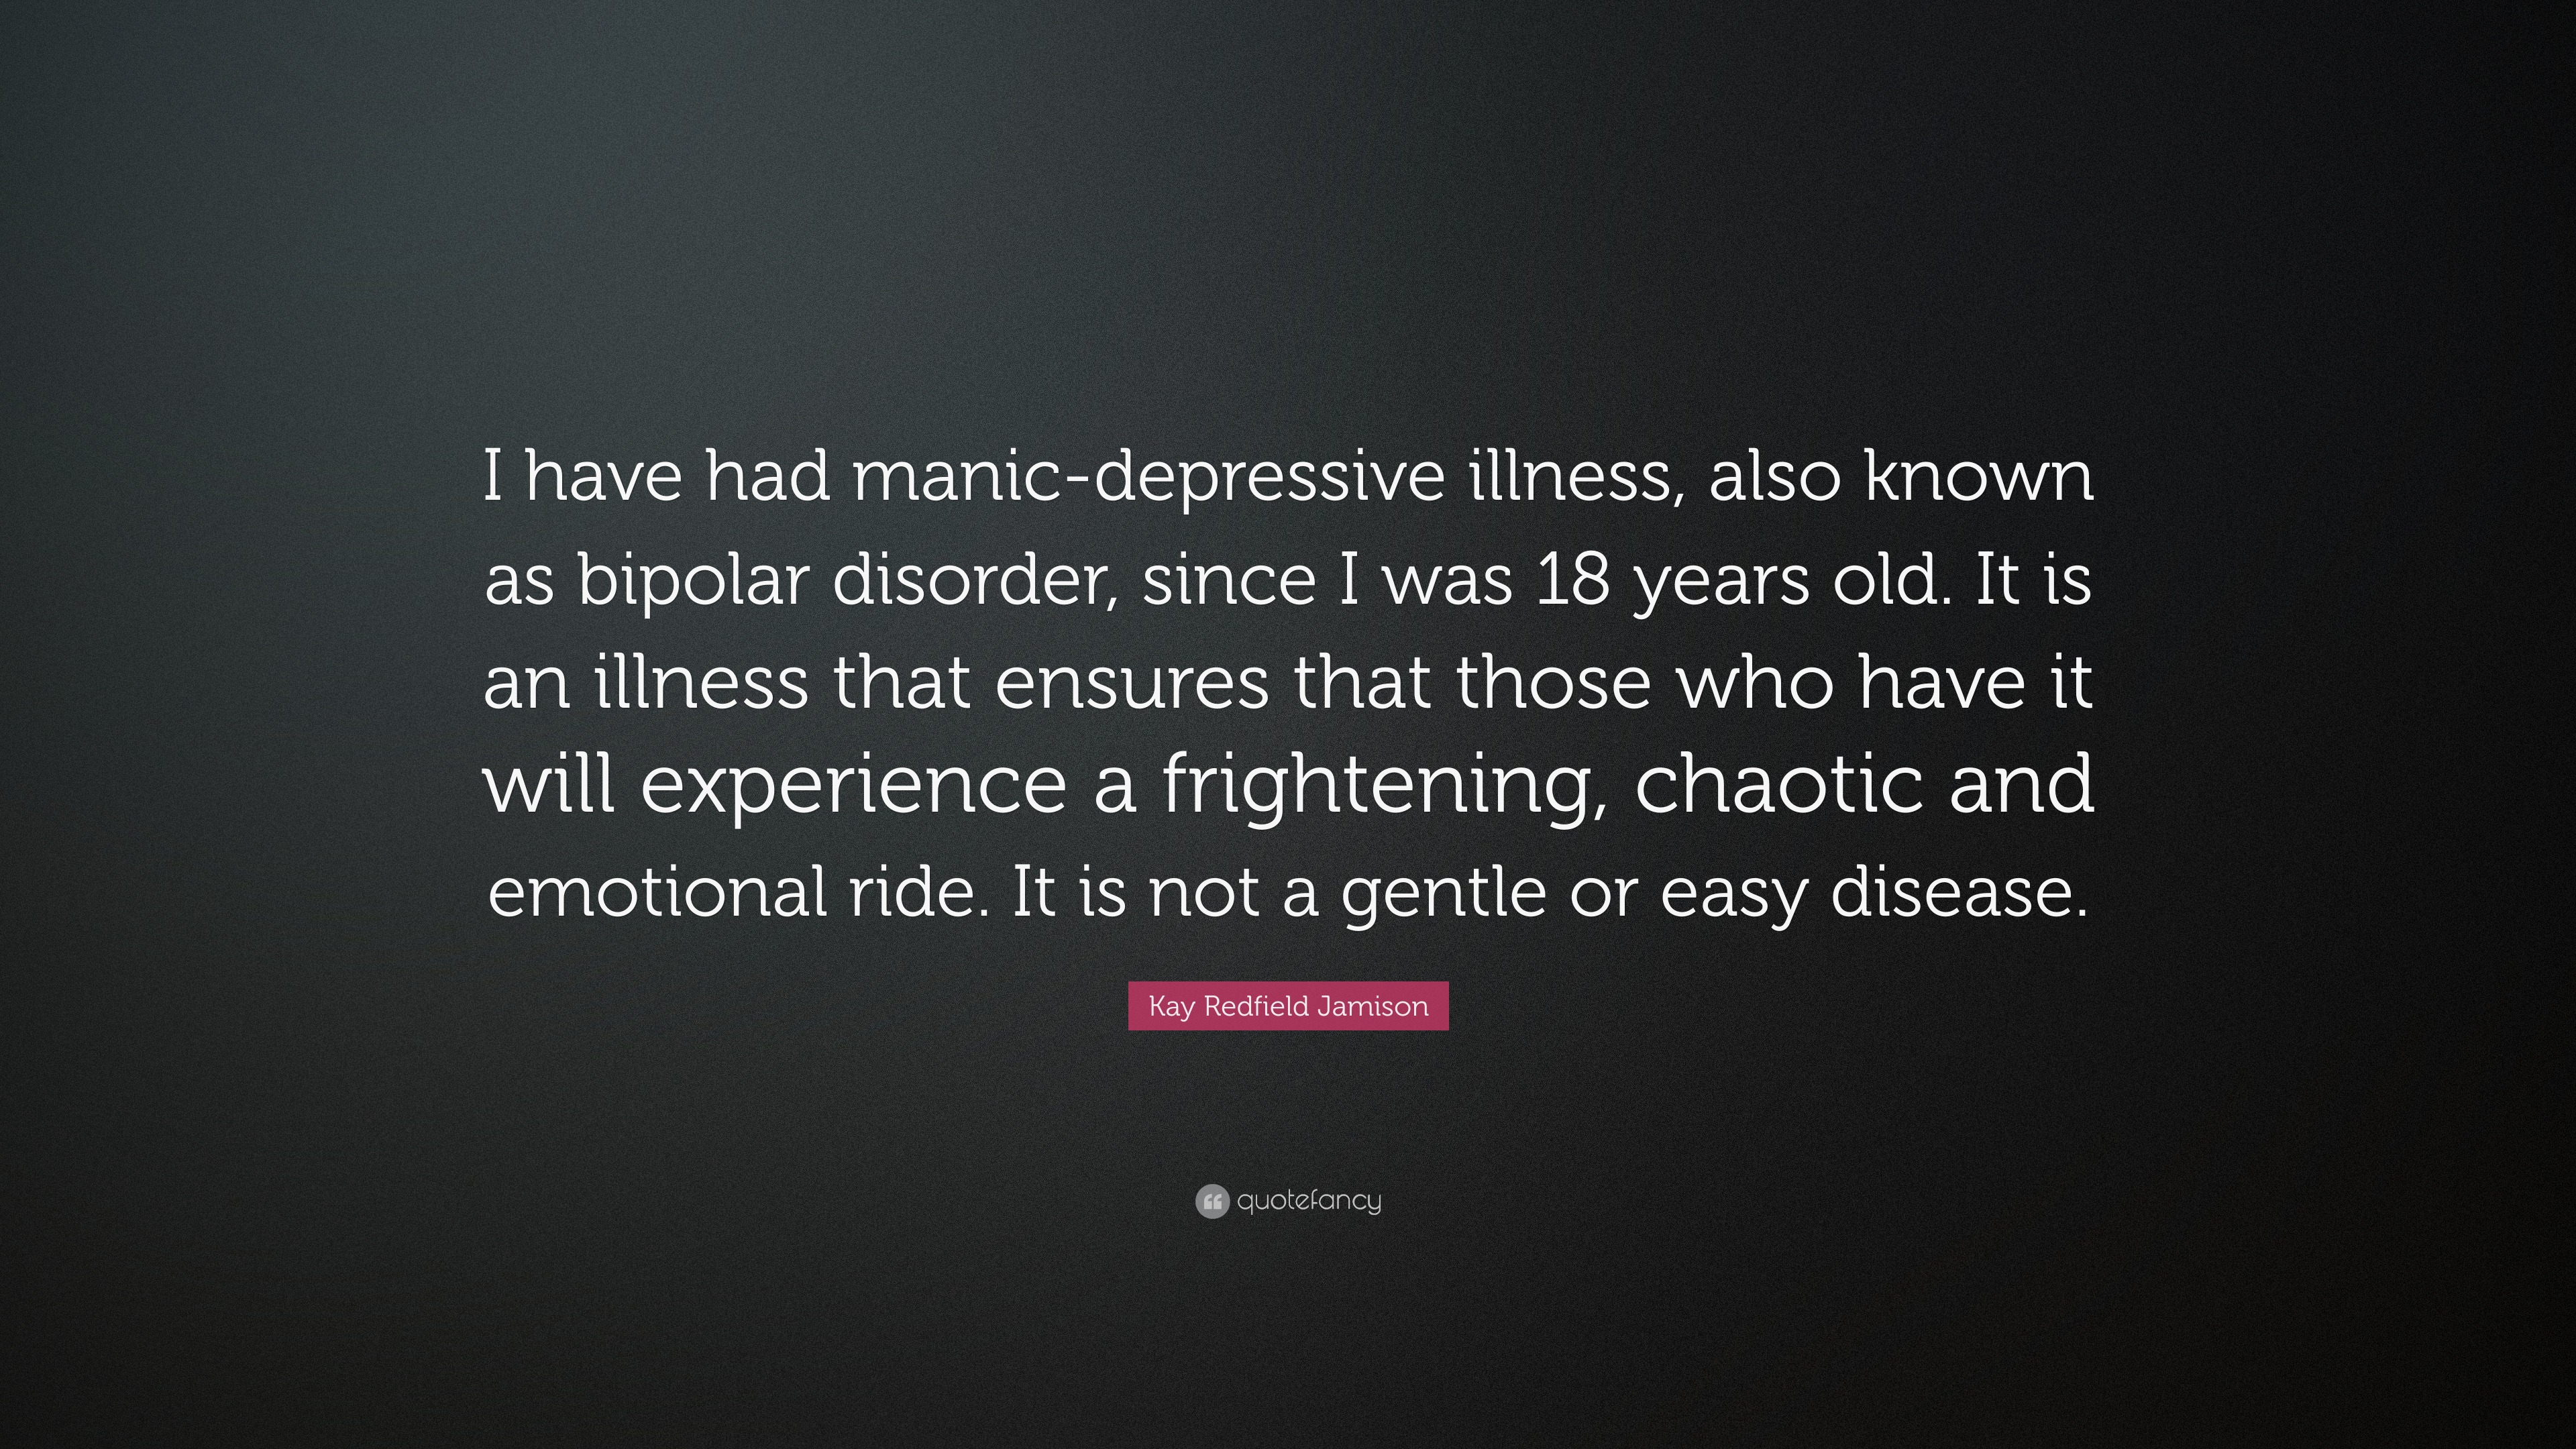 Kay Redfield Jamison Quote: “I have had manic-depressive illness, also  known as bipolar disorder, since I was 18 years old. It is an illness that  ens...”